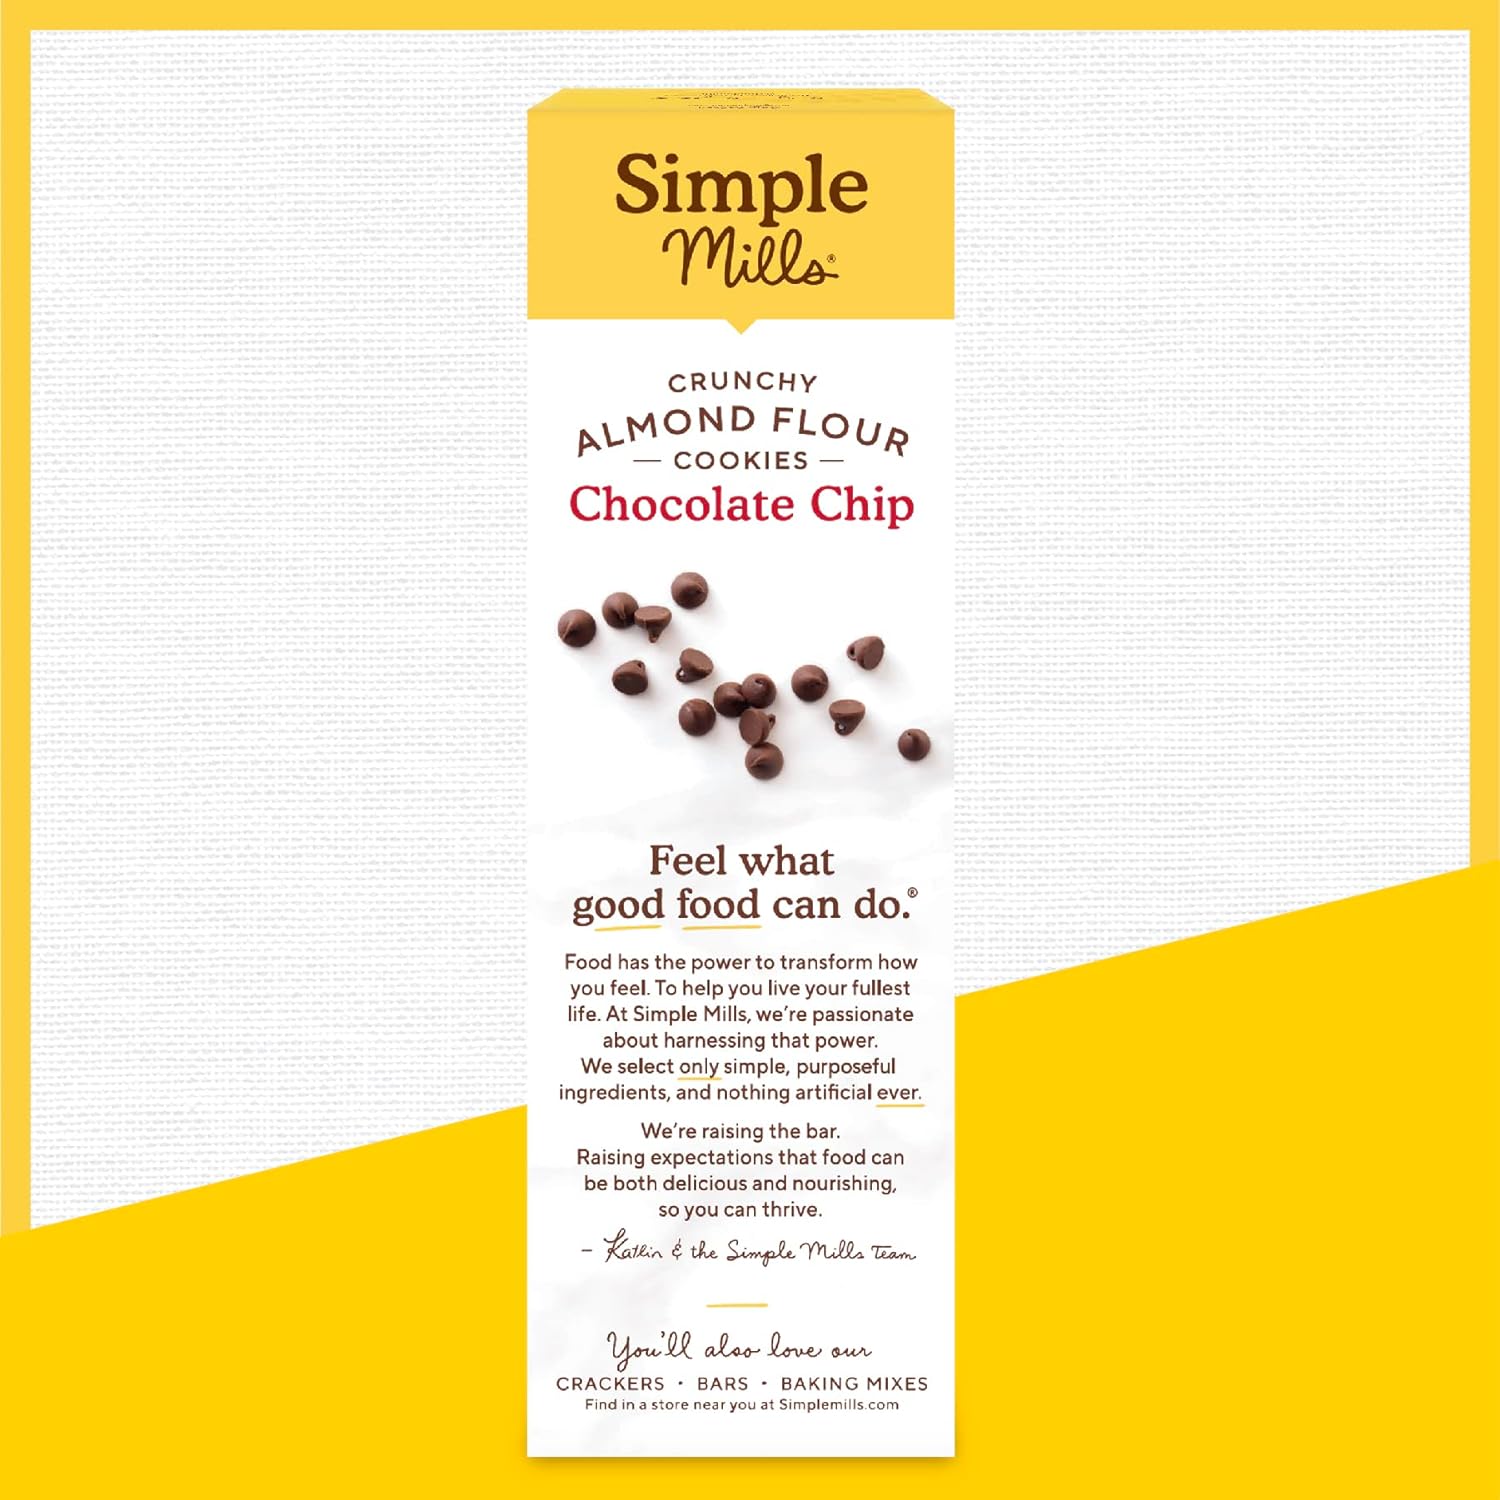 Simple Mills Almond Flour Crunchy Cookies, Chocolate Chip - Gluten Free, Vegan, Healthy Snacks, Made with Organic Coconut Oil, 5.5 oz (Pack of 3) : Grocery & Gourmet Food